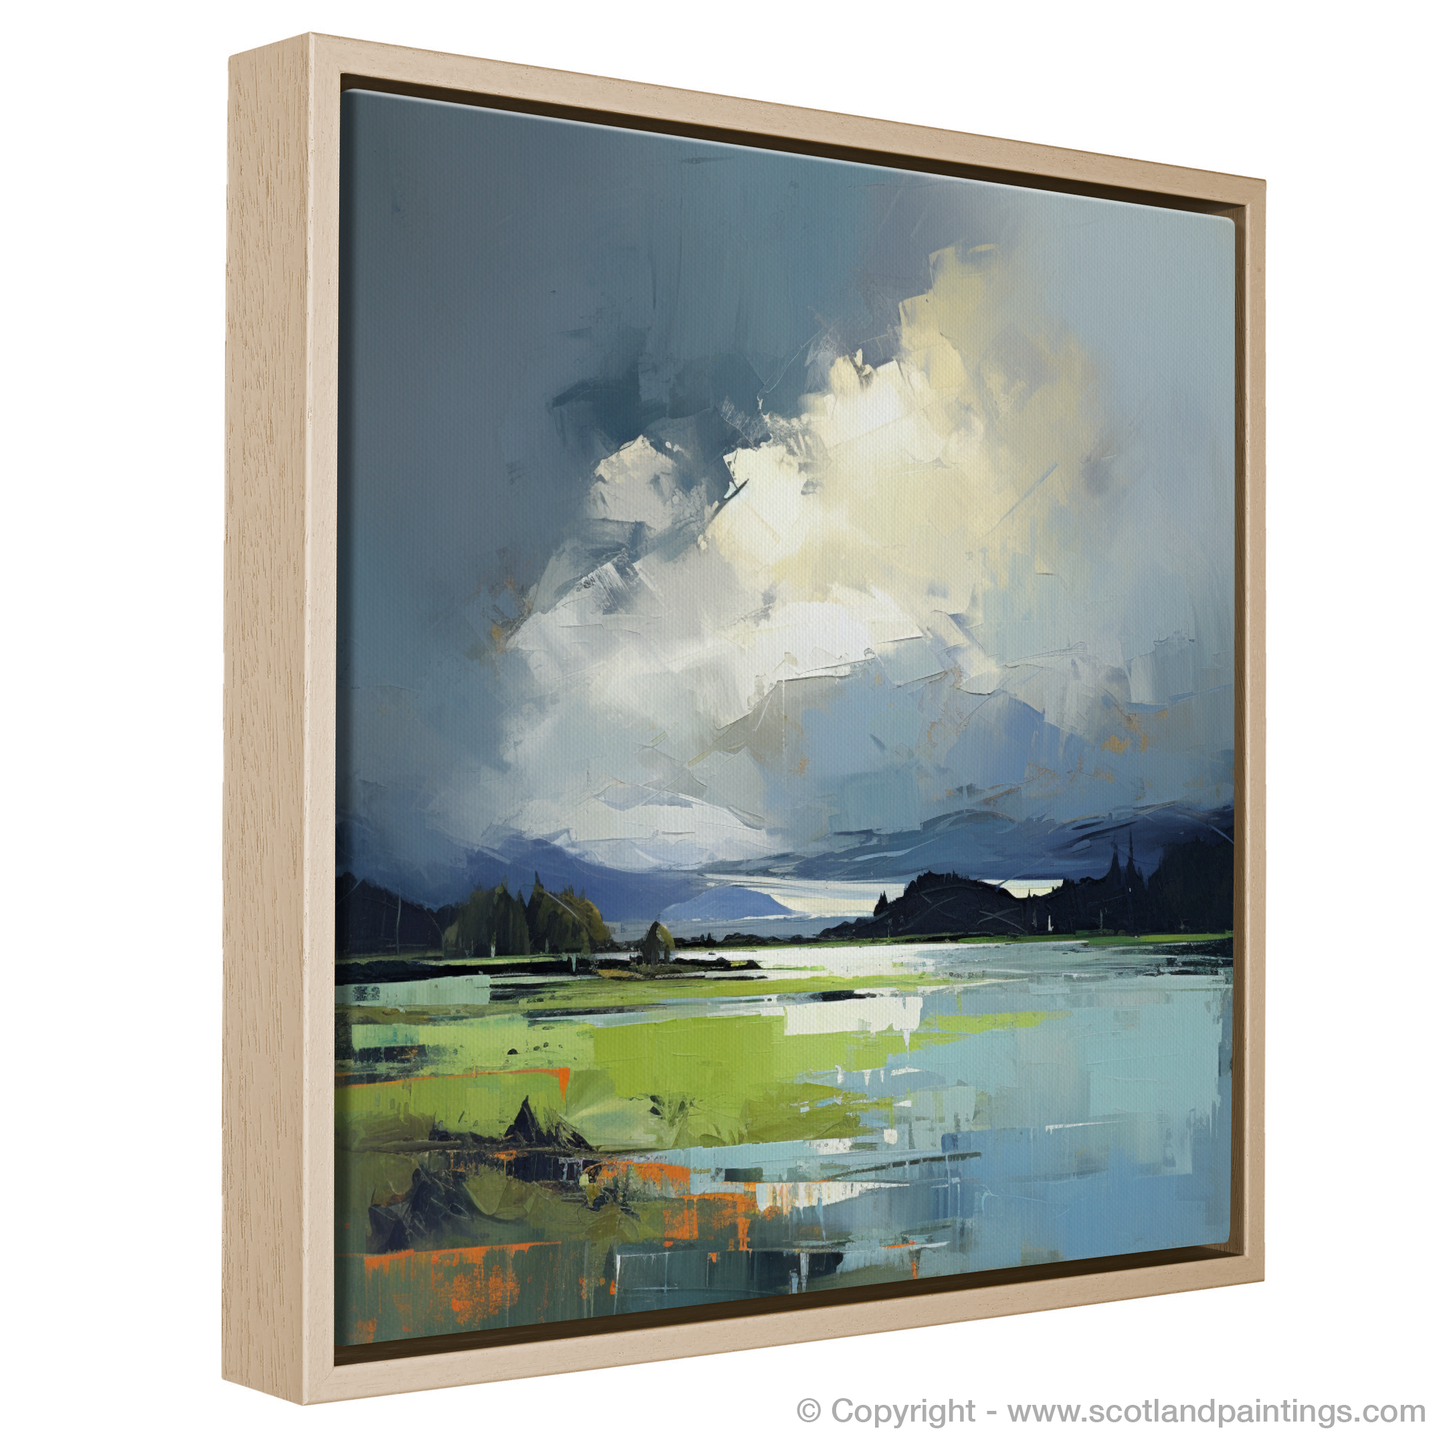 Painting and Art Print of Storm clouds above Loch Lomond entitled "Storm Over Loch Lomond: A Contemporary Interpretation".